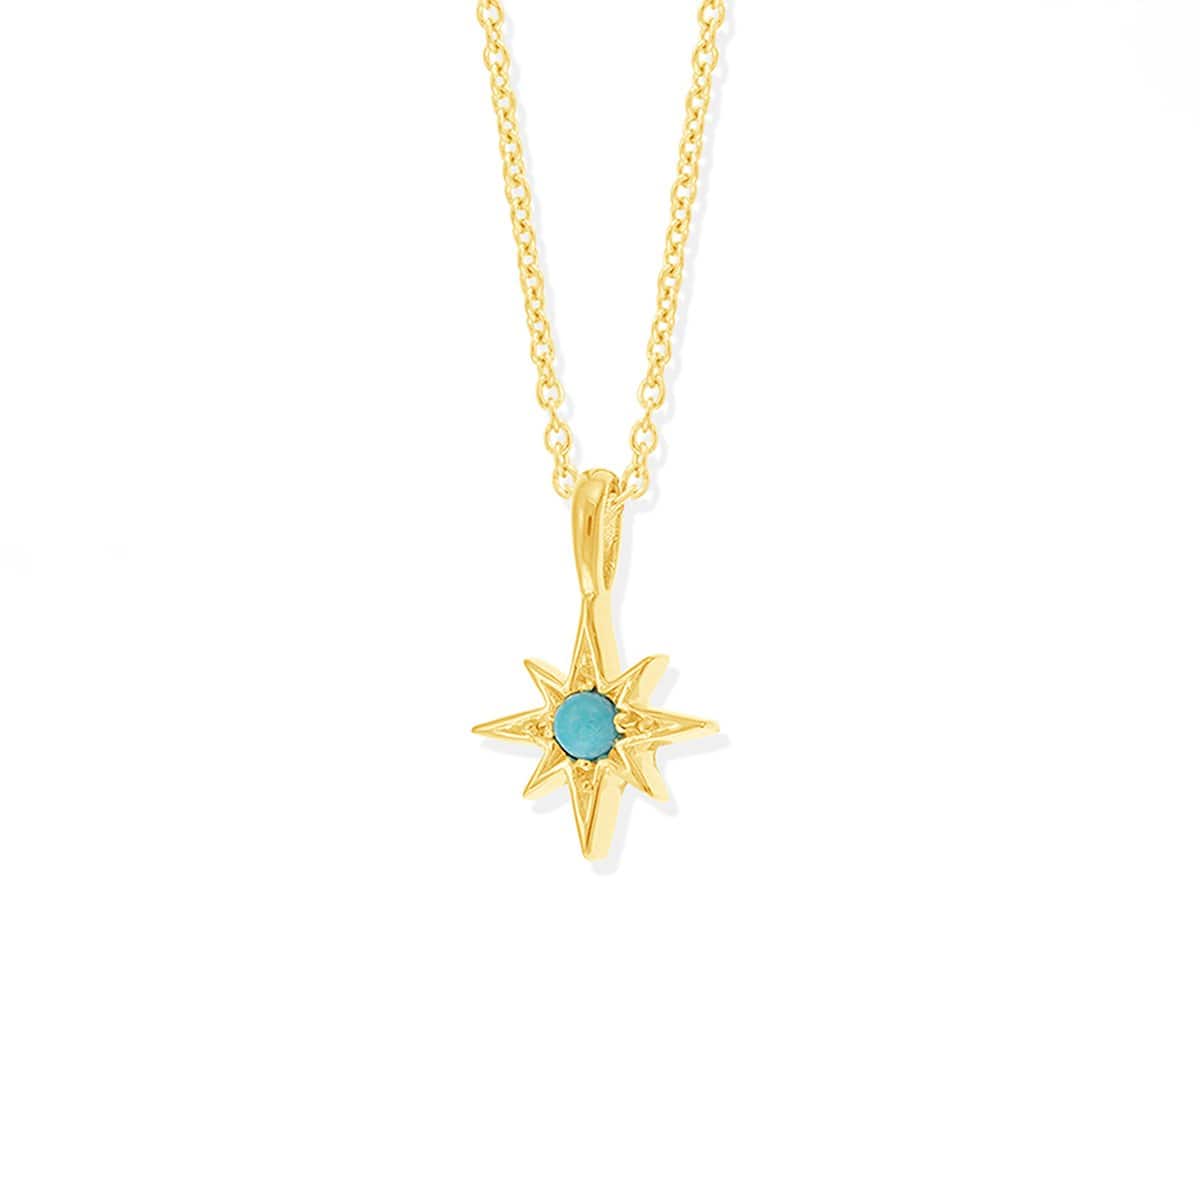 Boma Jewelry Necklaces 14K Gold Vermeil with Turquoise Luna Star Pendant with Stone